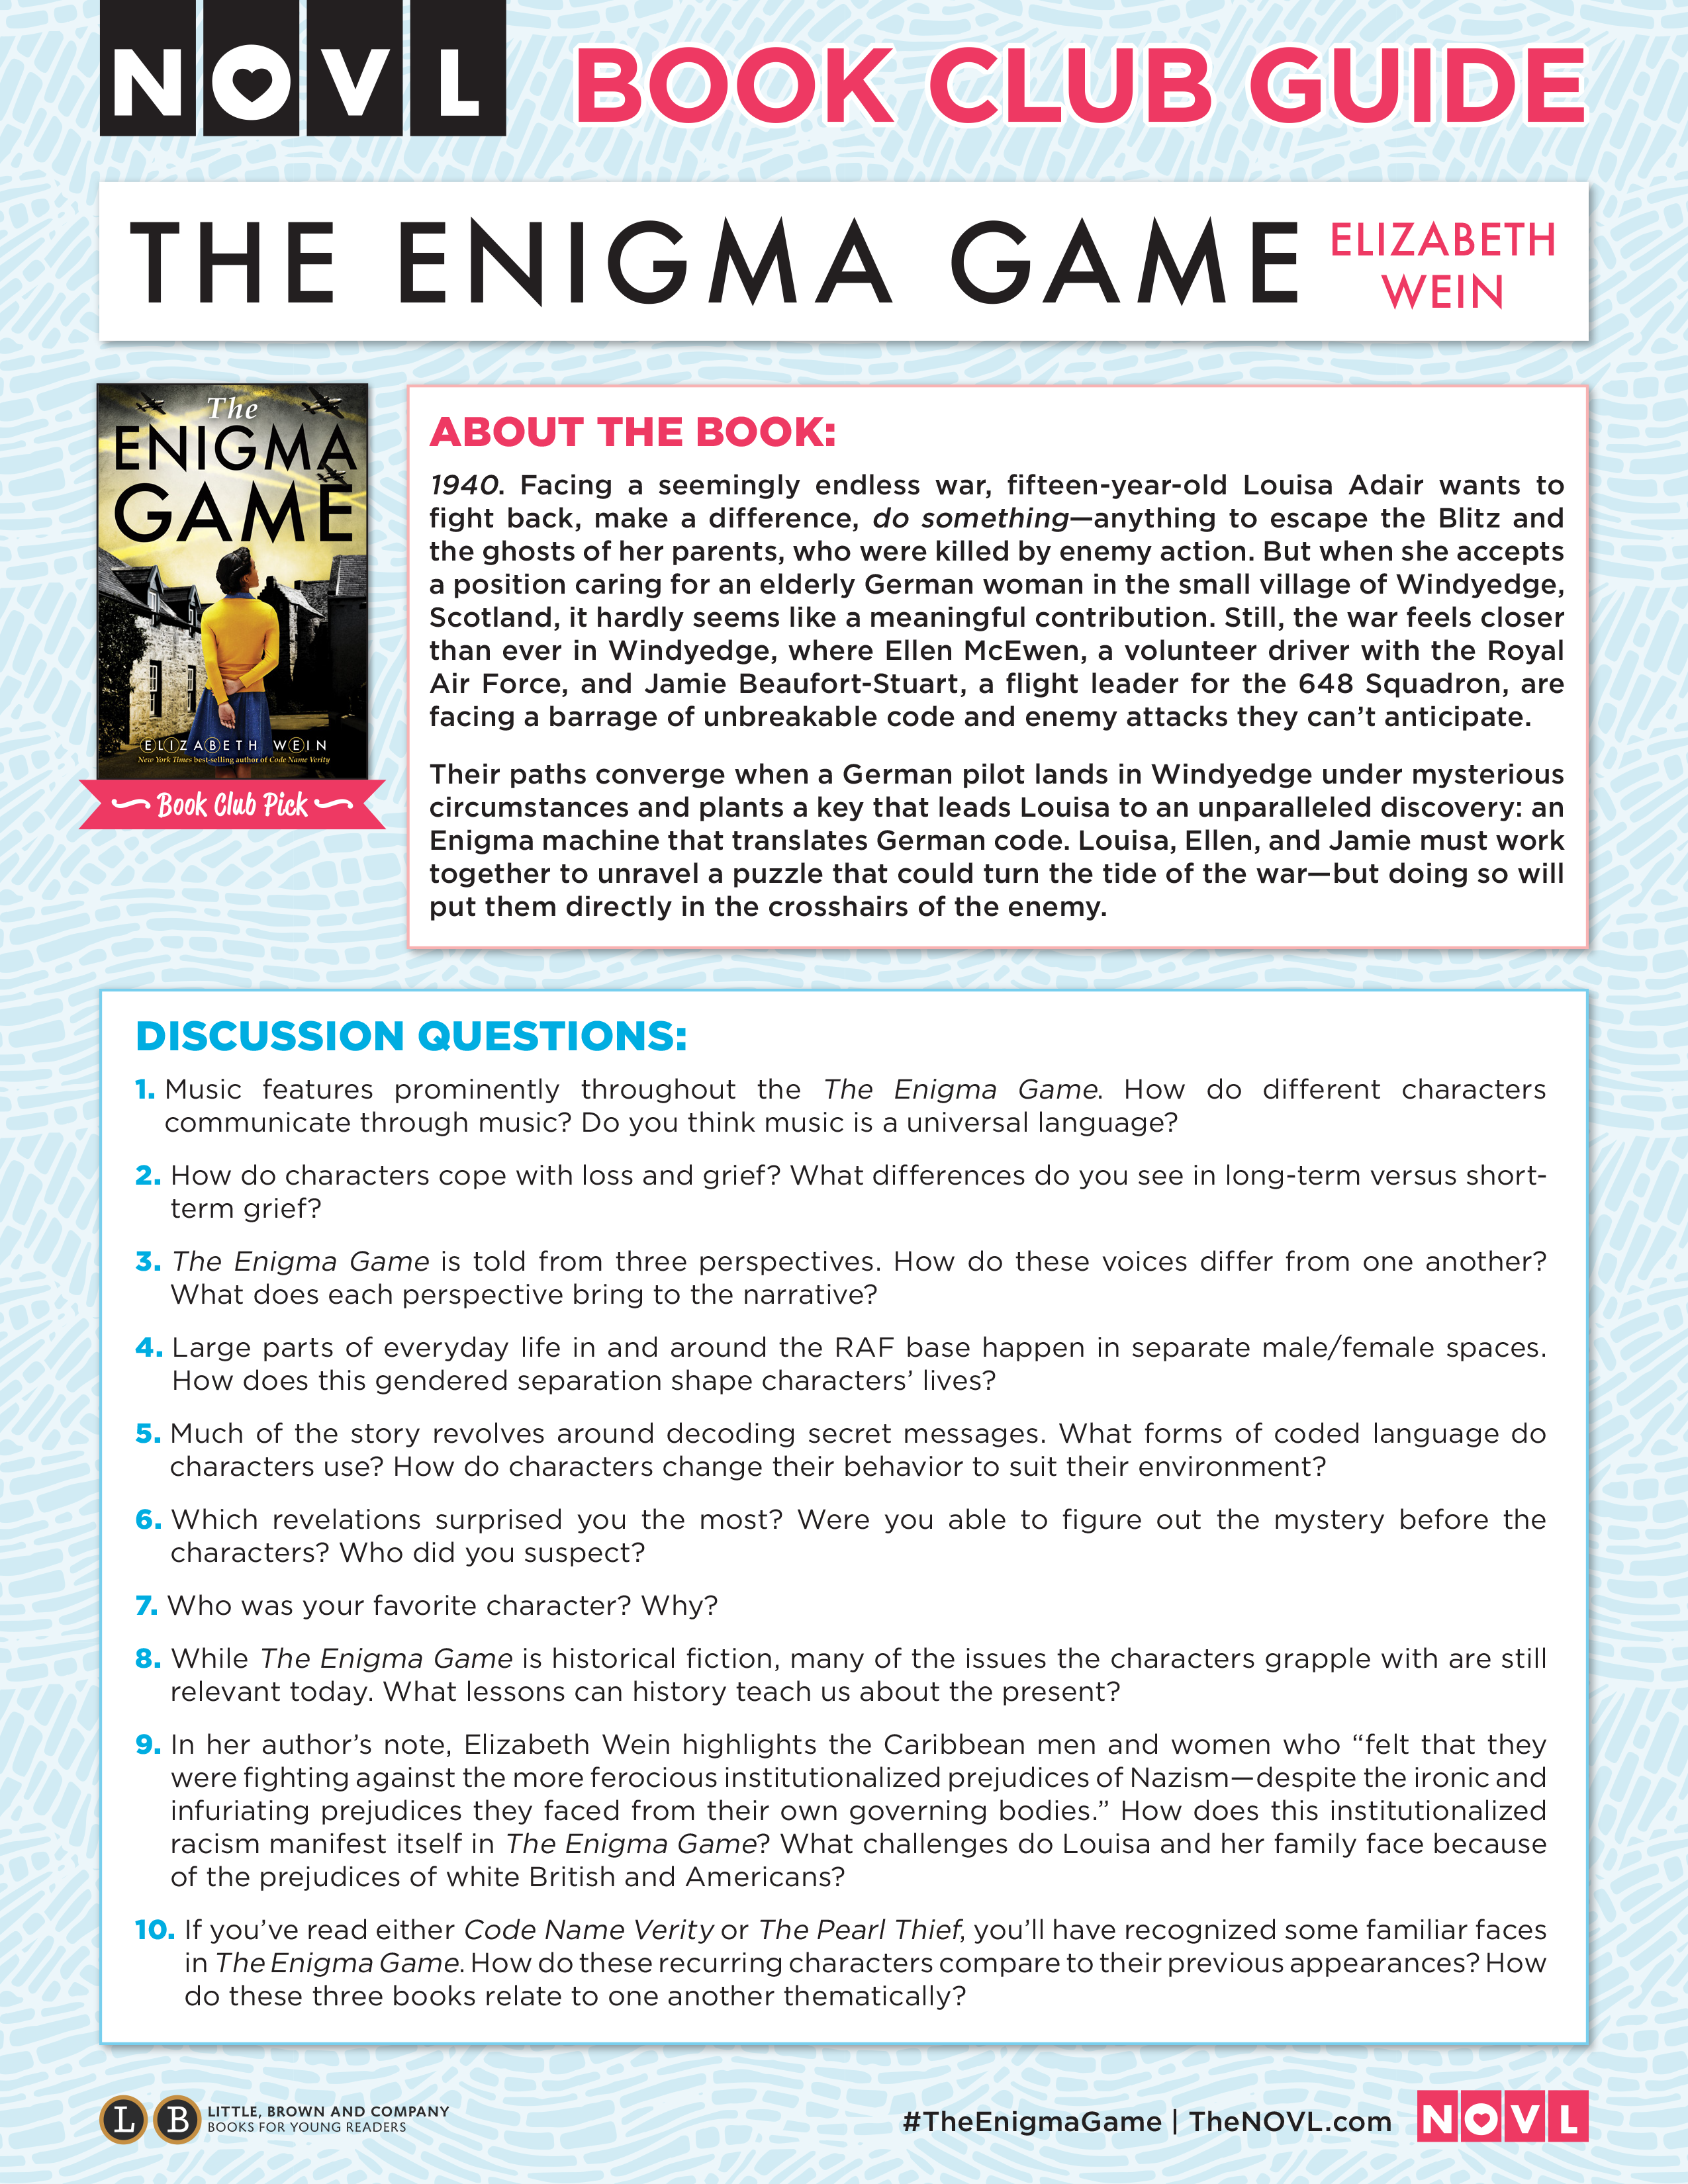 NOVL - Image for Book Club Guide for 'The Enigma Game by Elizabeth Wein